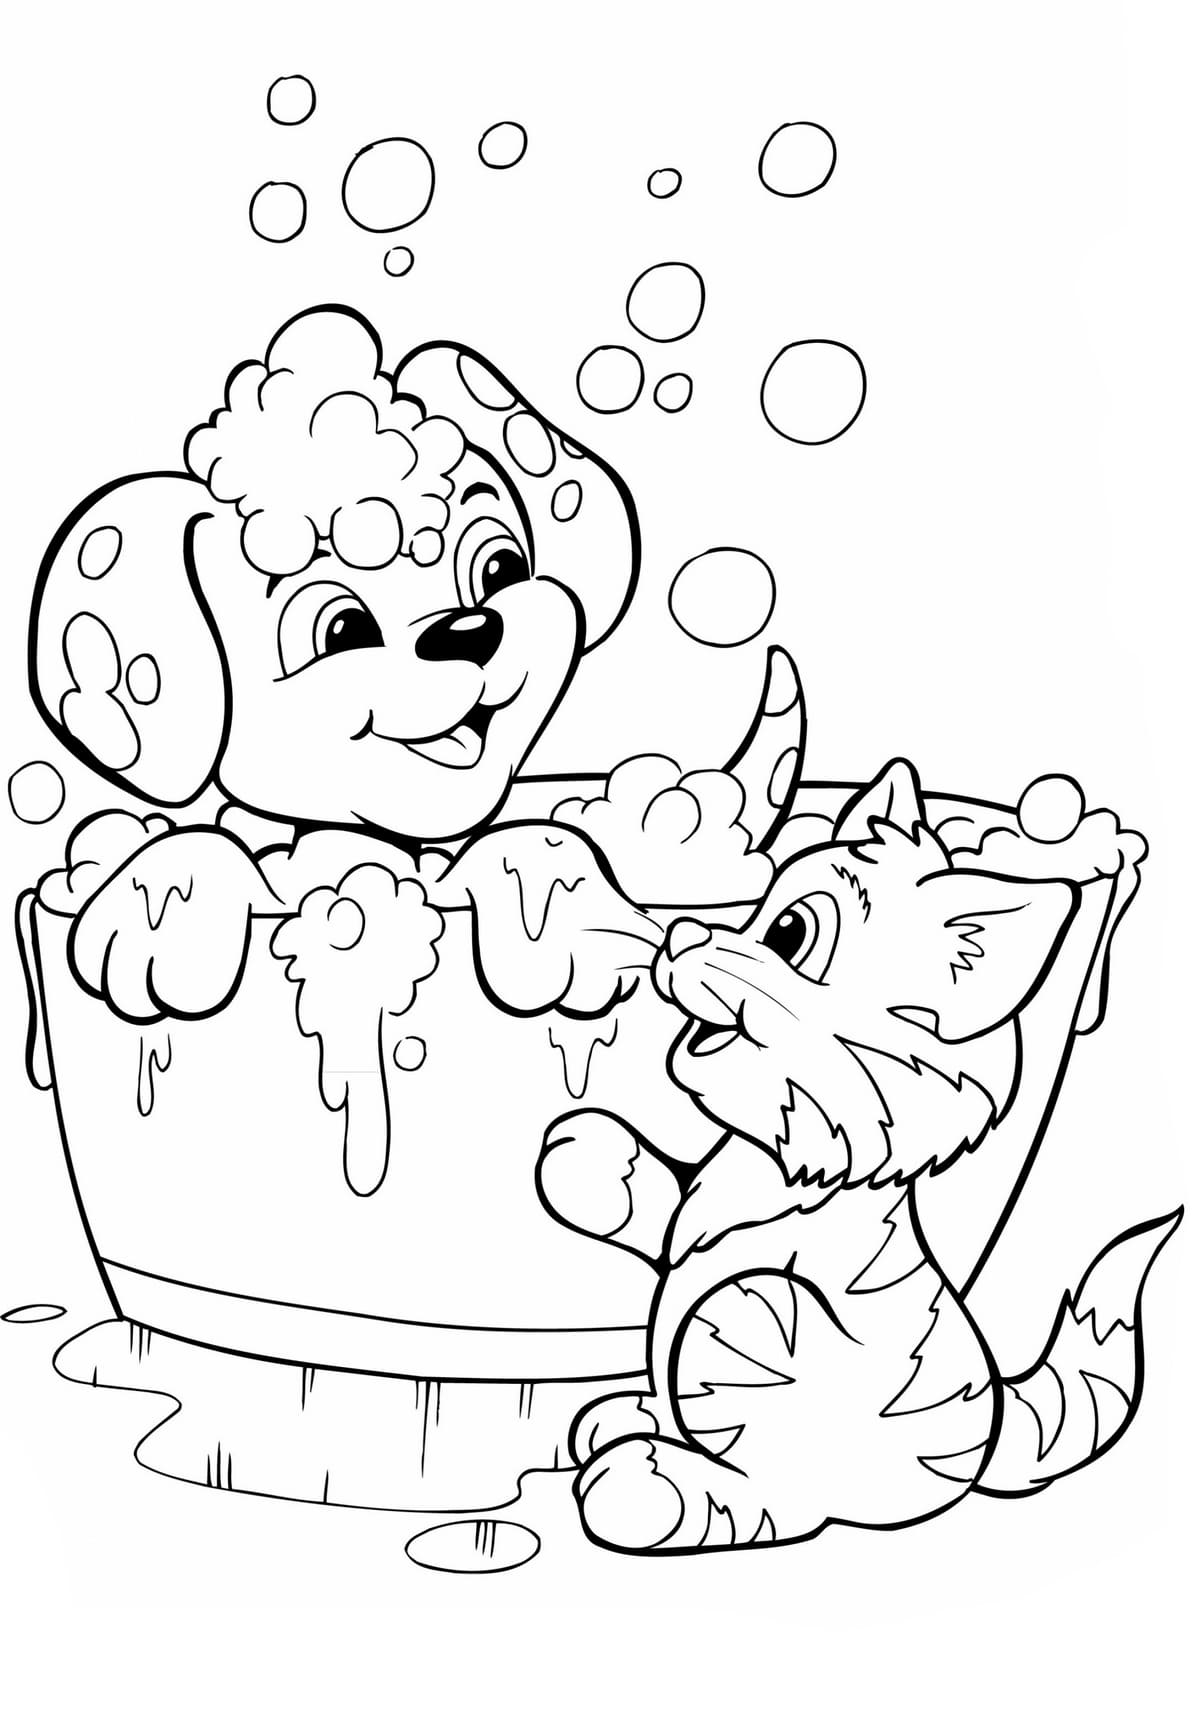 Cat and dog coloring pages printable coloring pages